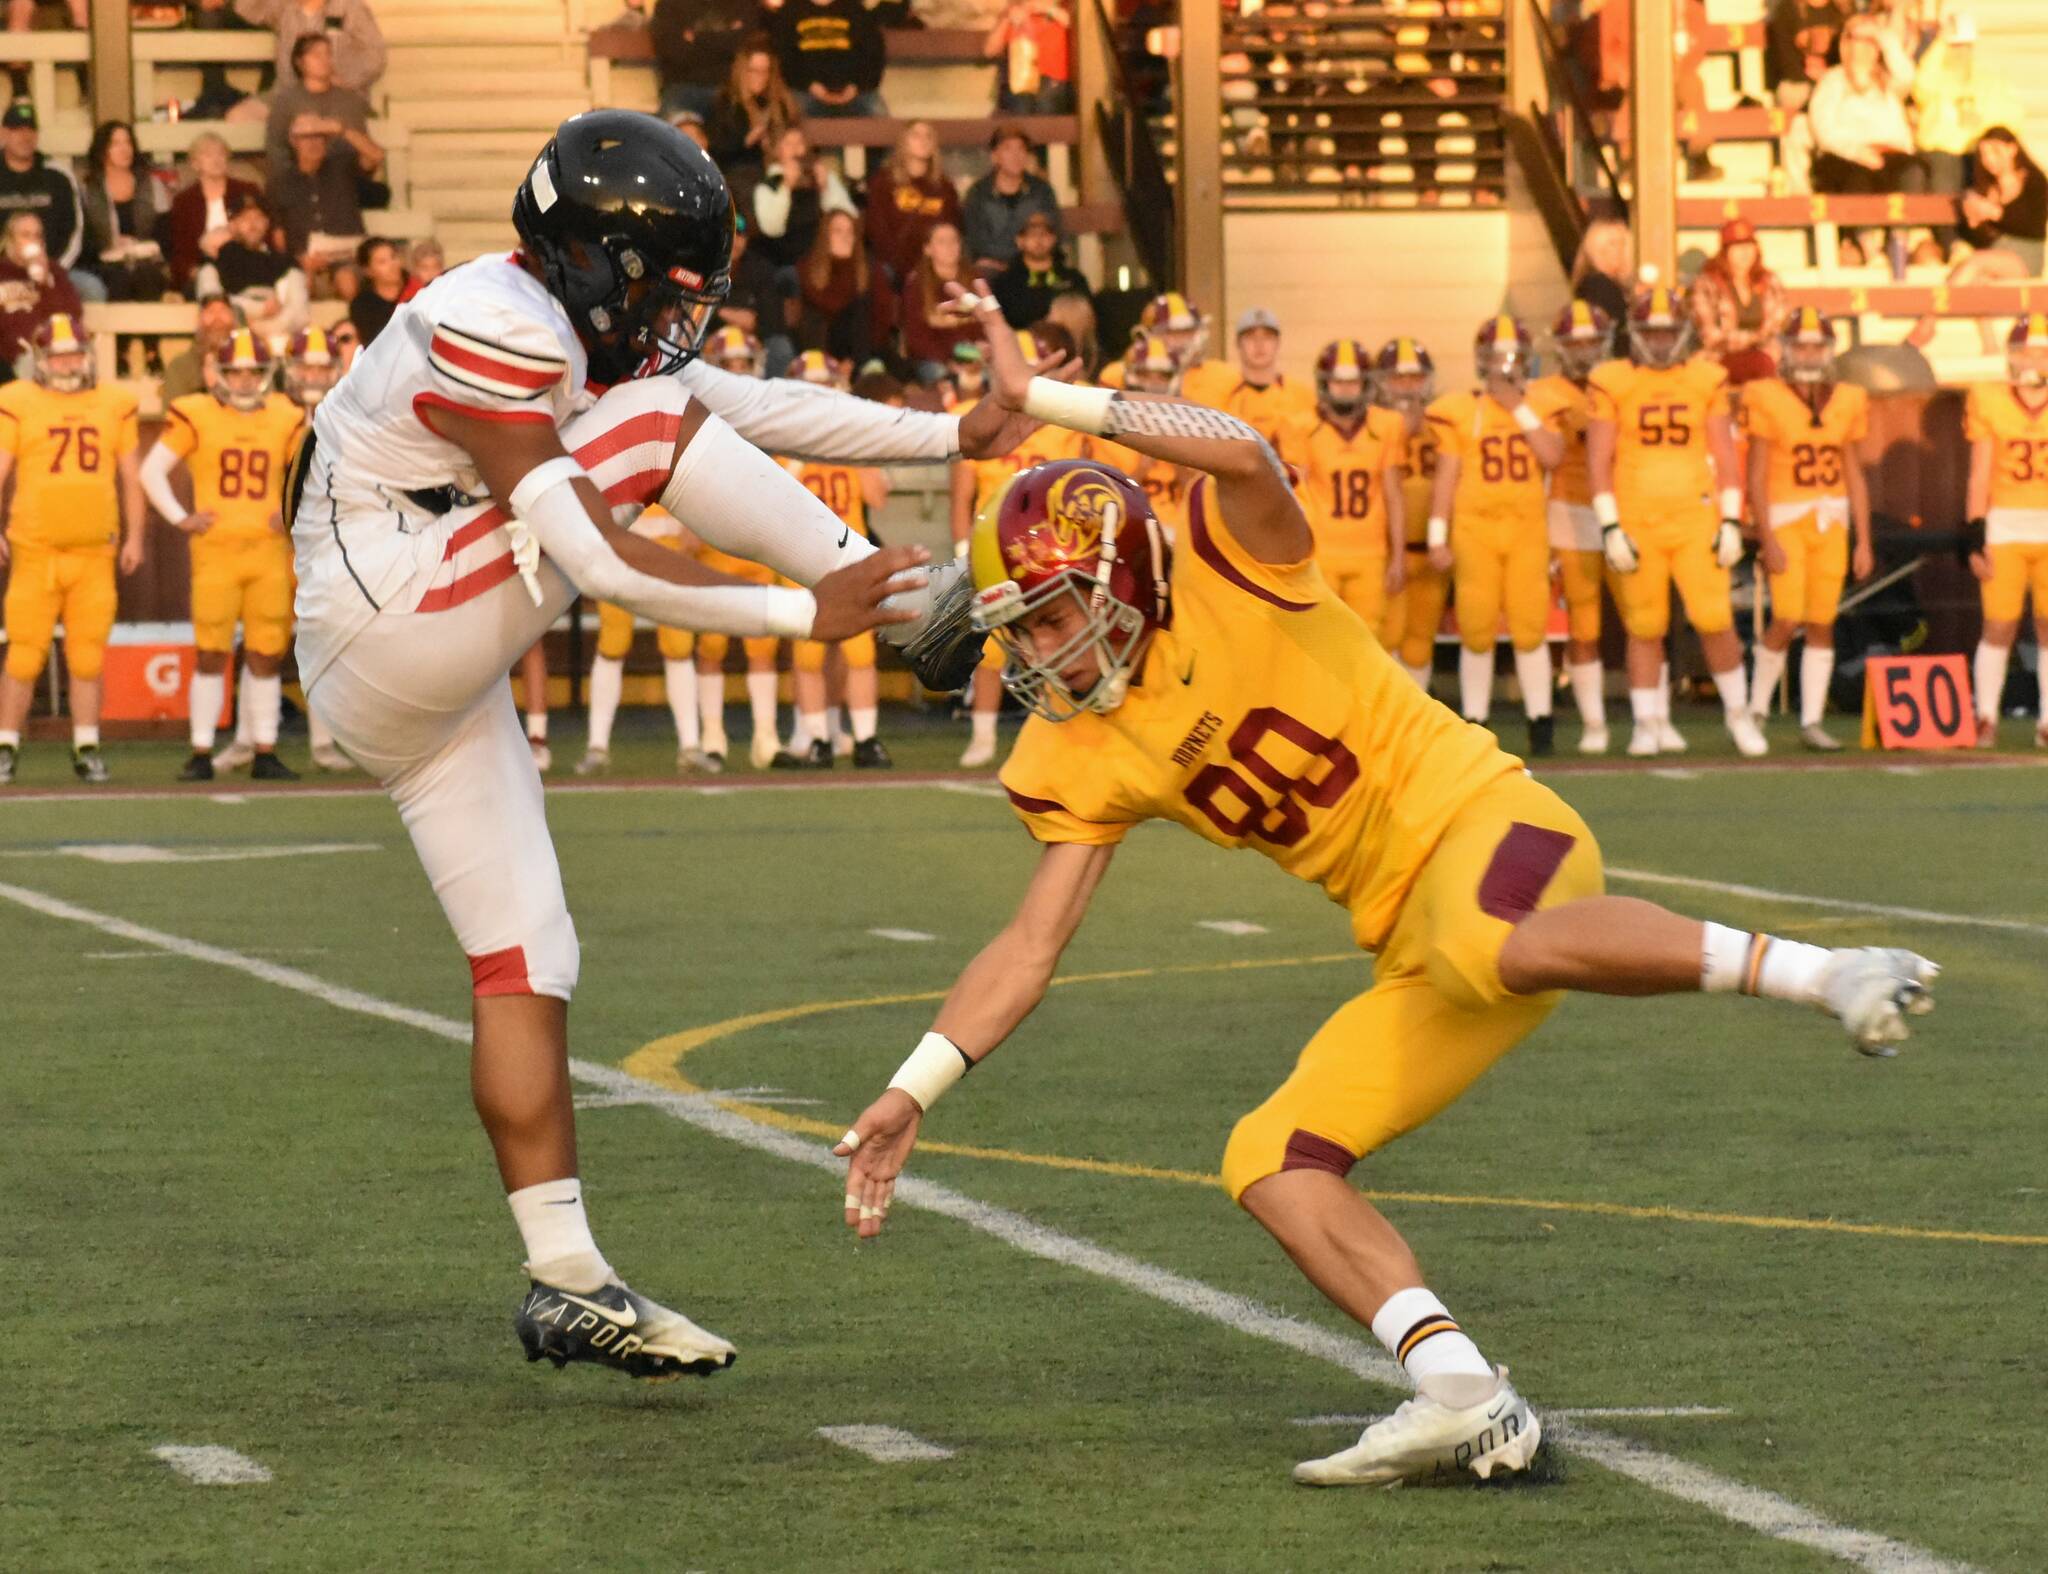 PHOTOS BY KEVIN HANSON
The Hornets’ Karson Holt coming very close to blocking a Franklin Pierce punt.